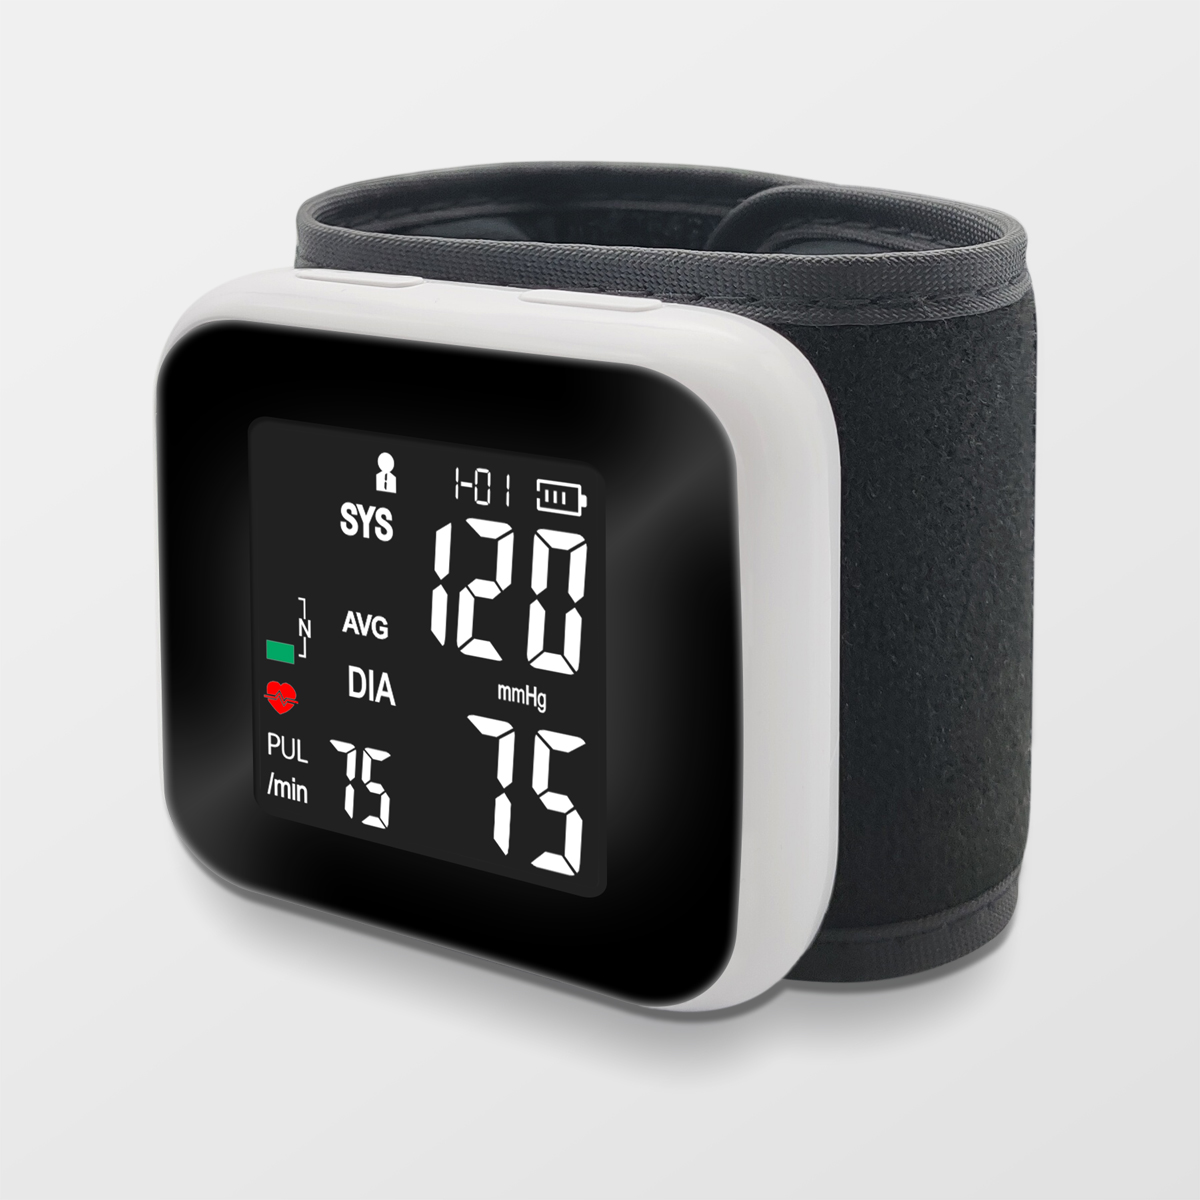 Rechargeable Li Battery High Accuray Wrist Blood Pressure Monitor with Backlight Display